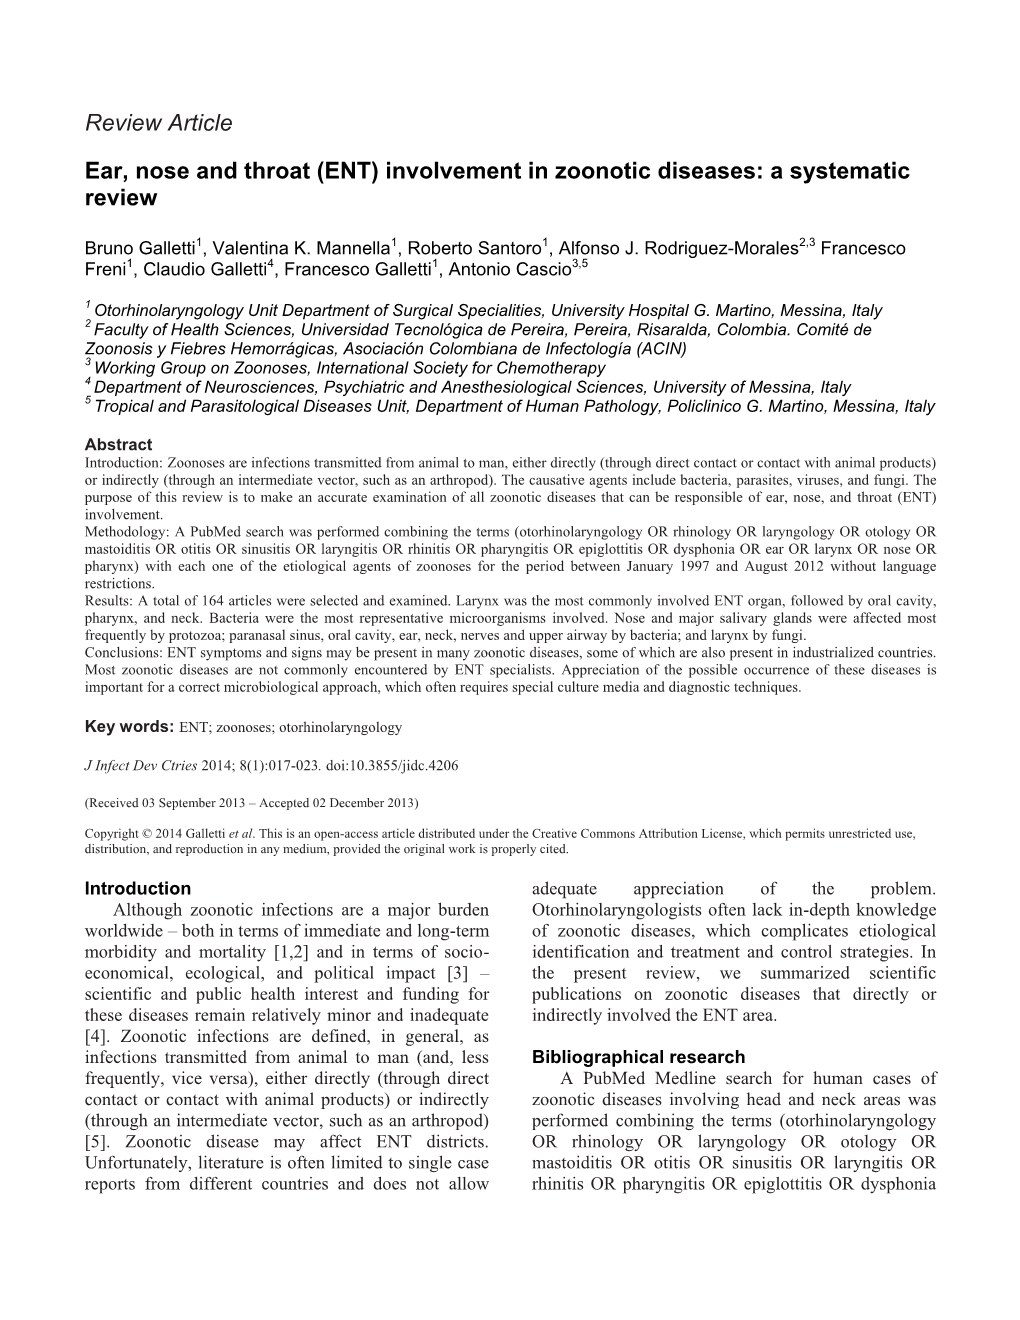 Ear, Nose and Throat (ENT) Involvement in Zoonotic Diseases: a Systematic Review